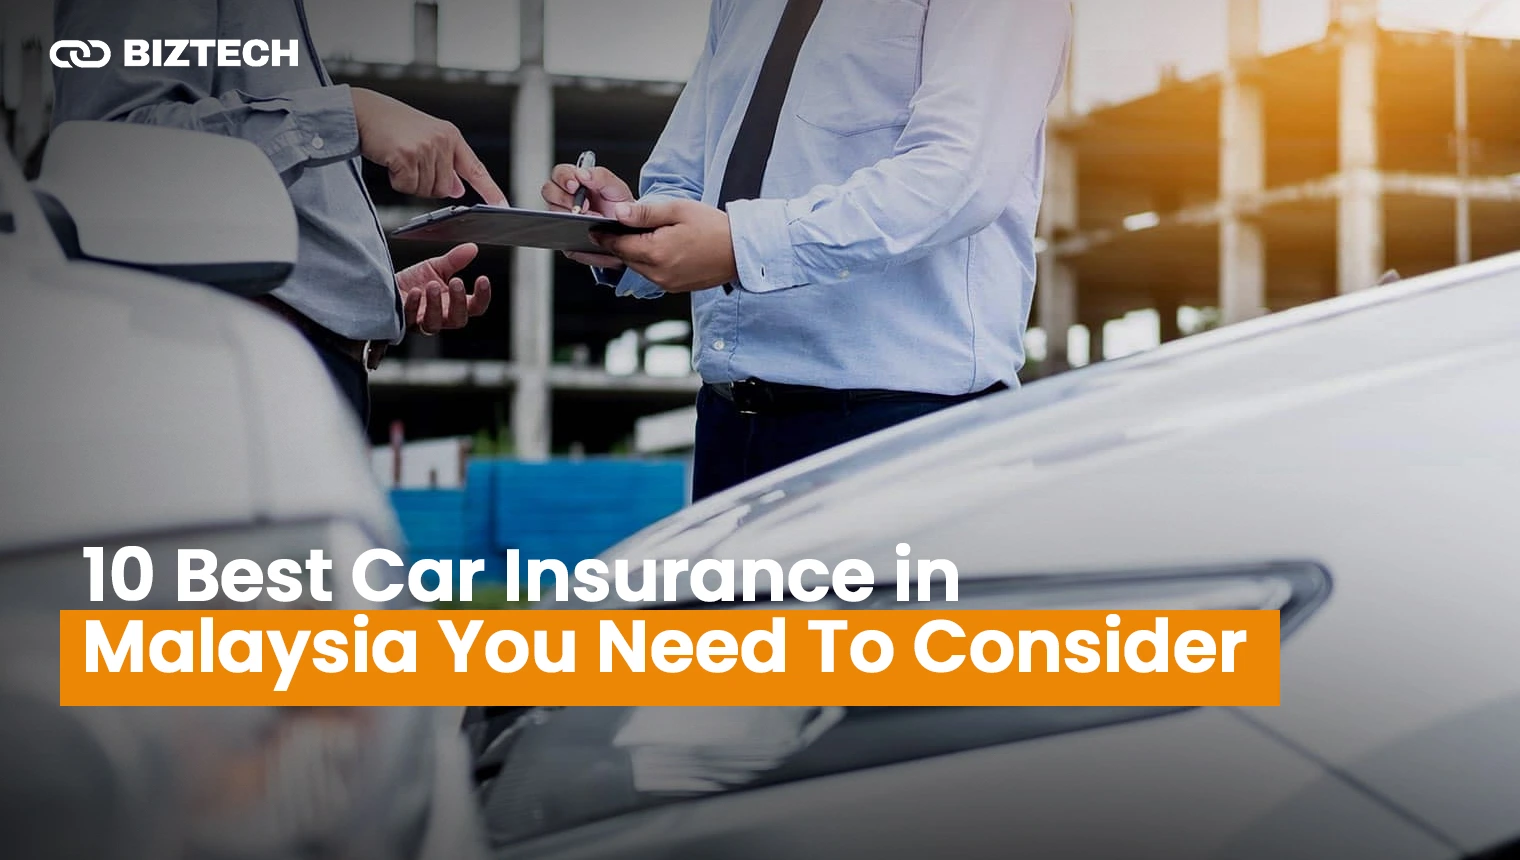 10 Best Car Insurance in Malaysia You Need To Consider